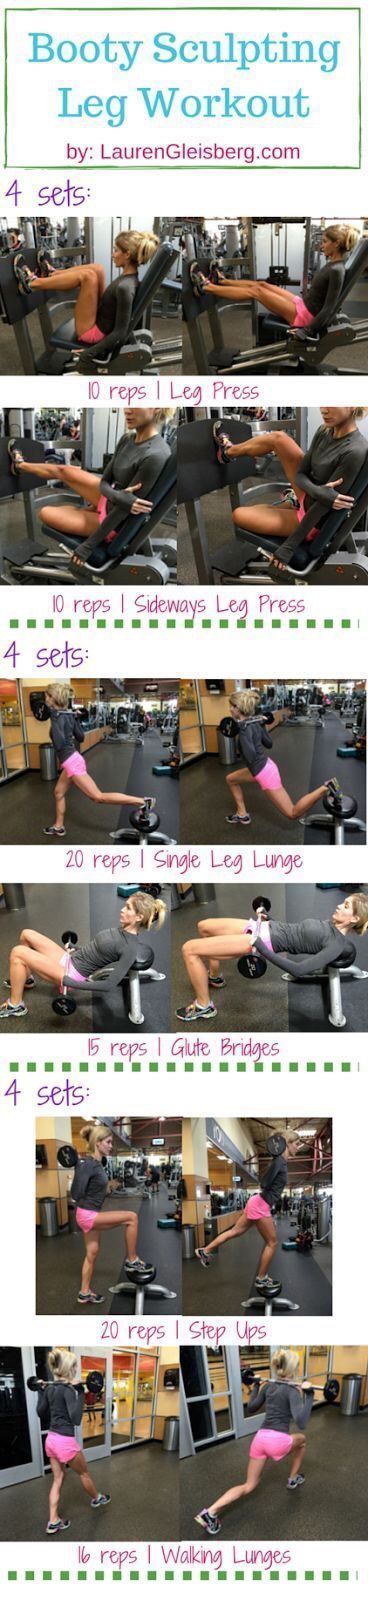 Killer leg workout to do at the gym! You’ll definitely walk away feeling this in your way to a better lower body!